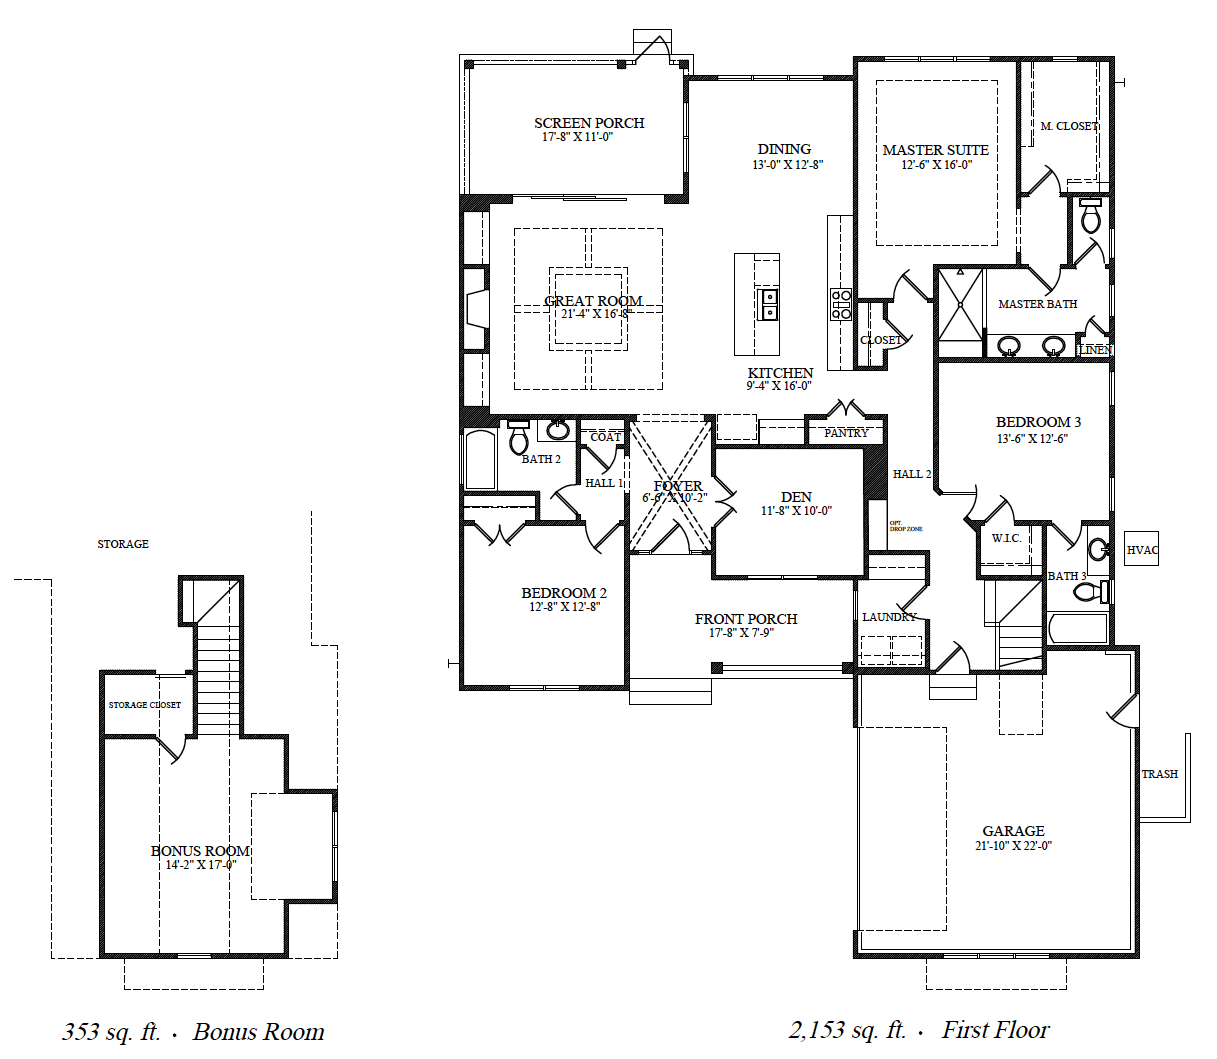 1011 Trisail, Everton II - New Home Plan for Charter Building Group in Wilmington, NC